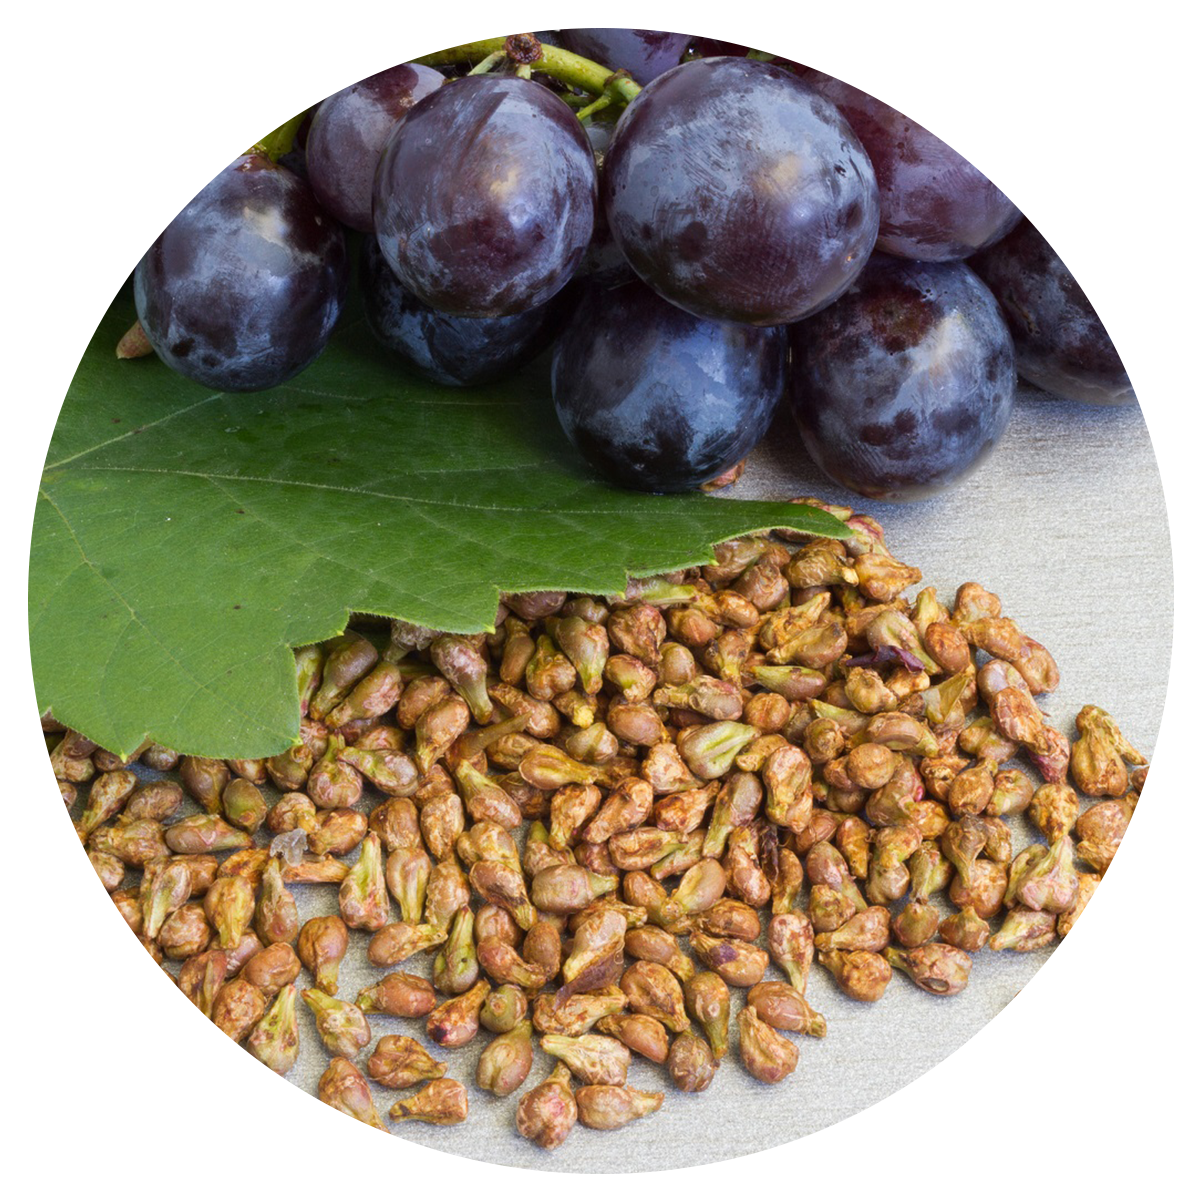 Grape seed included in the best multivitamins for men whole food blend